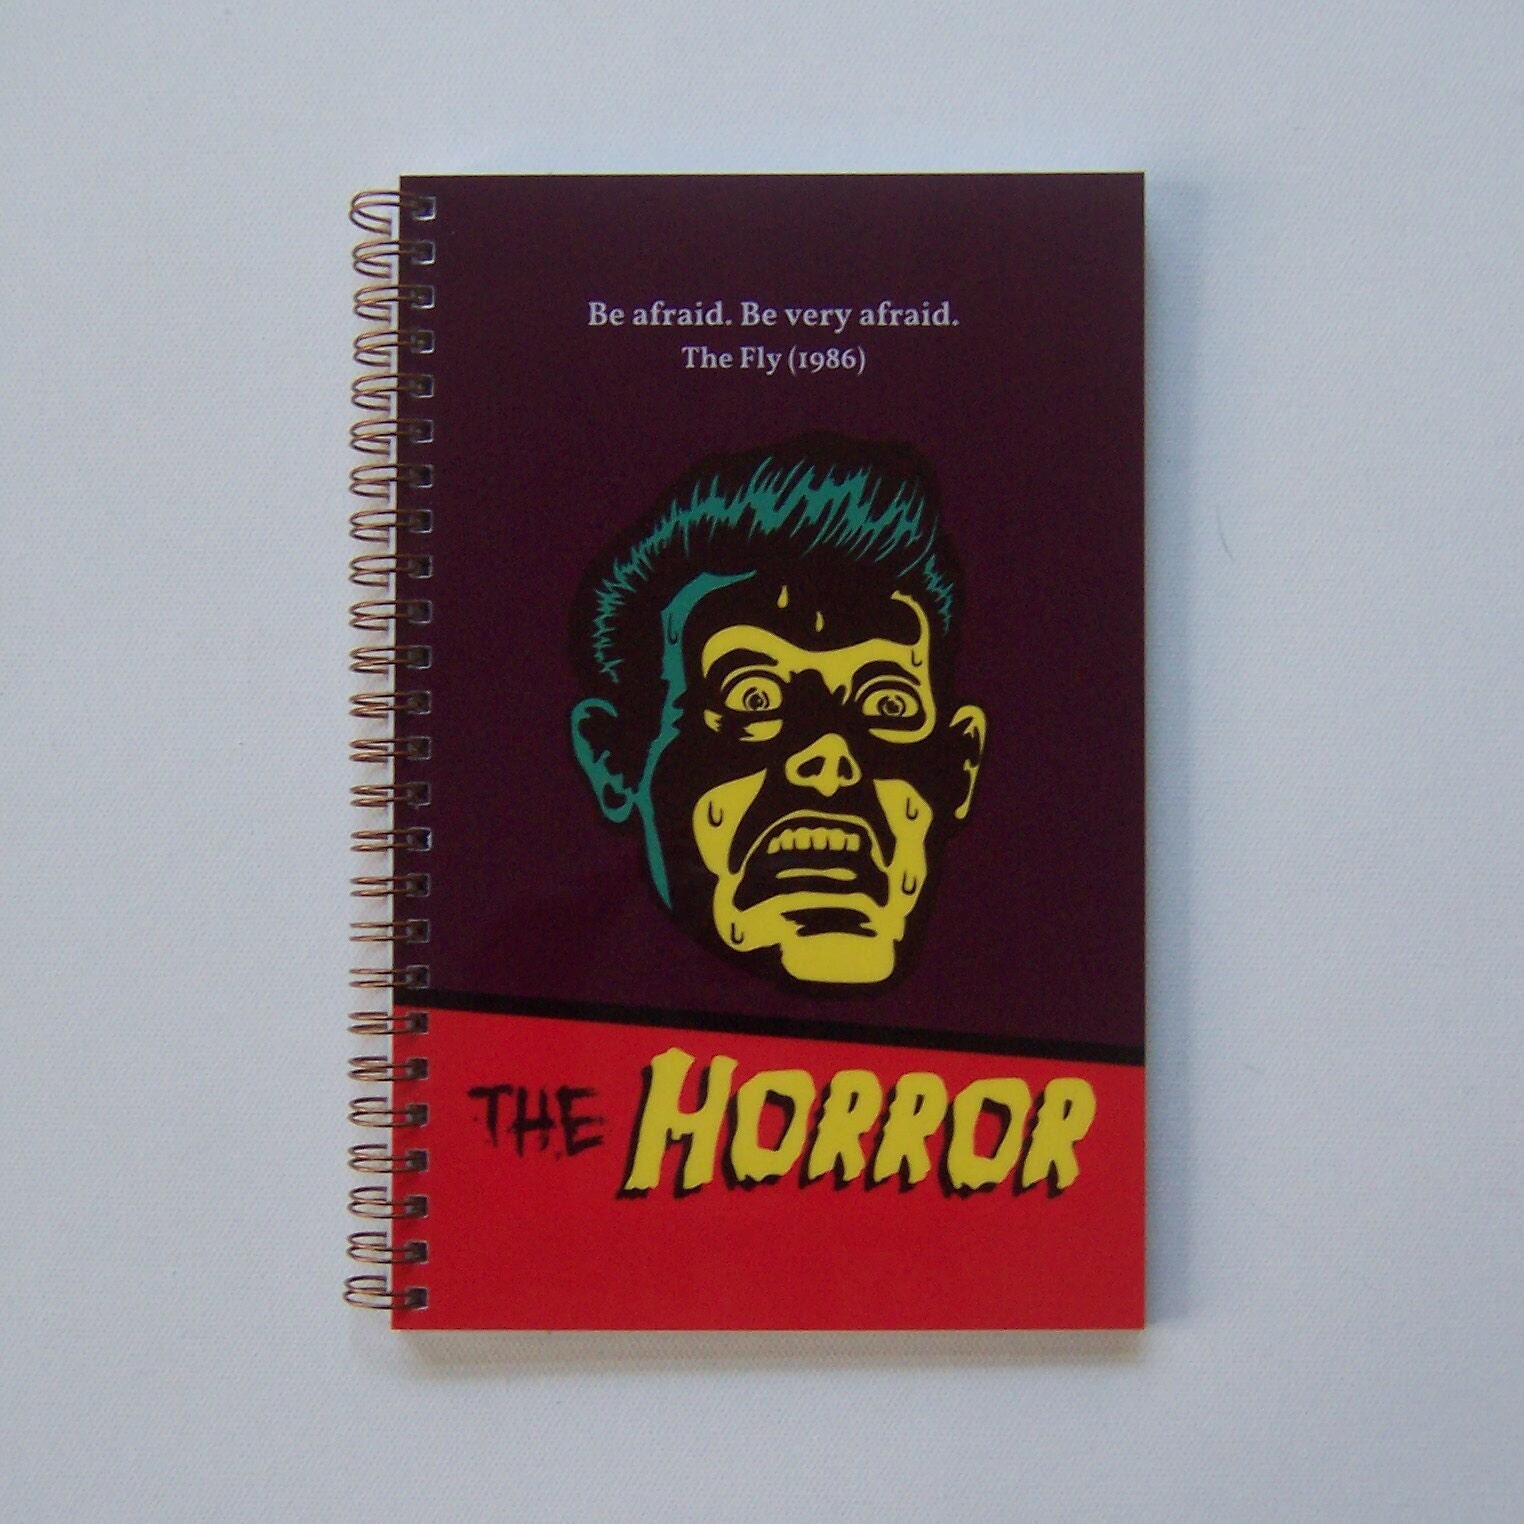 Backrooms A24 Movie Poster Spiral Notebook for Sale by Spvilles